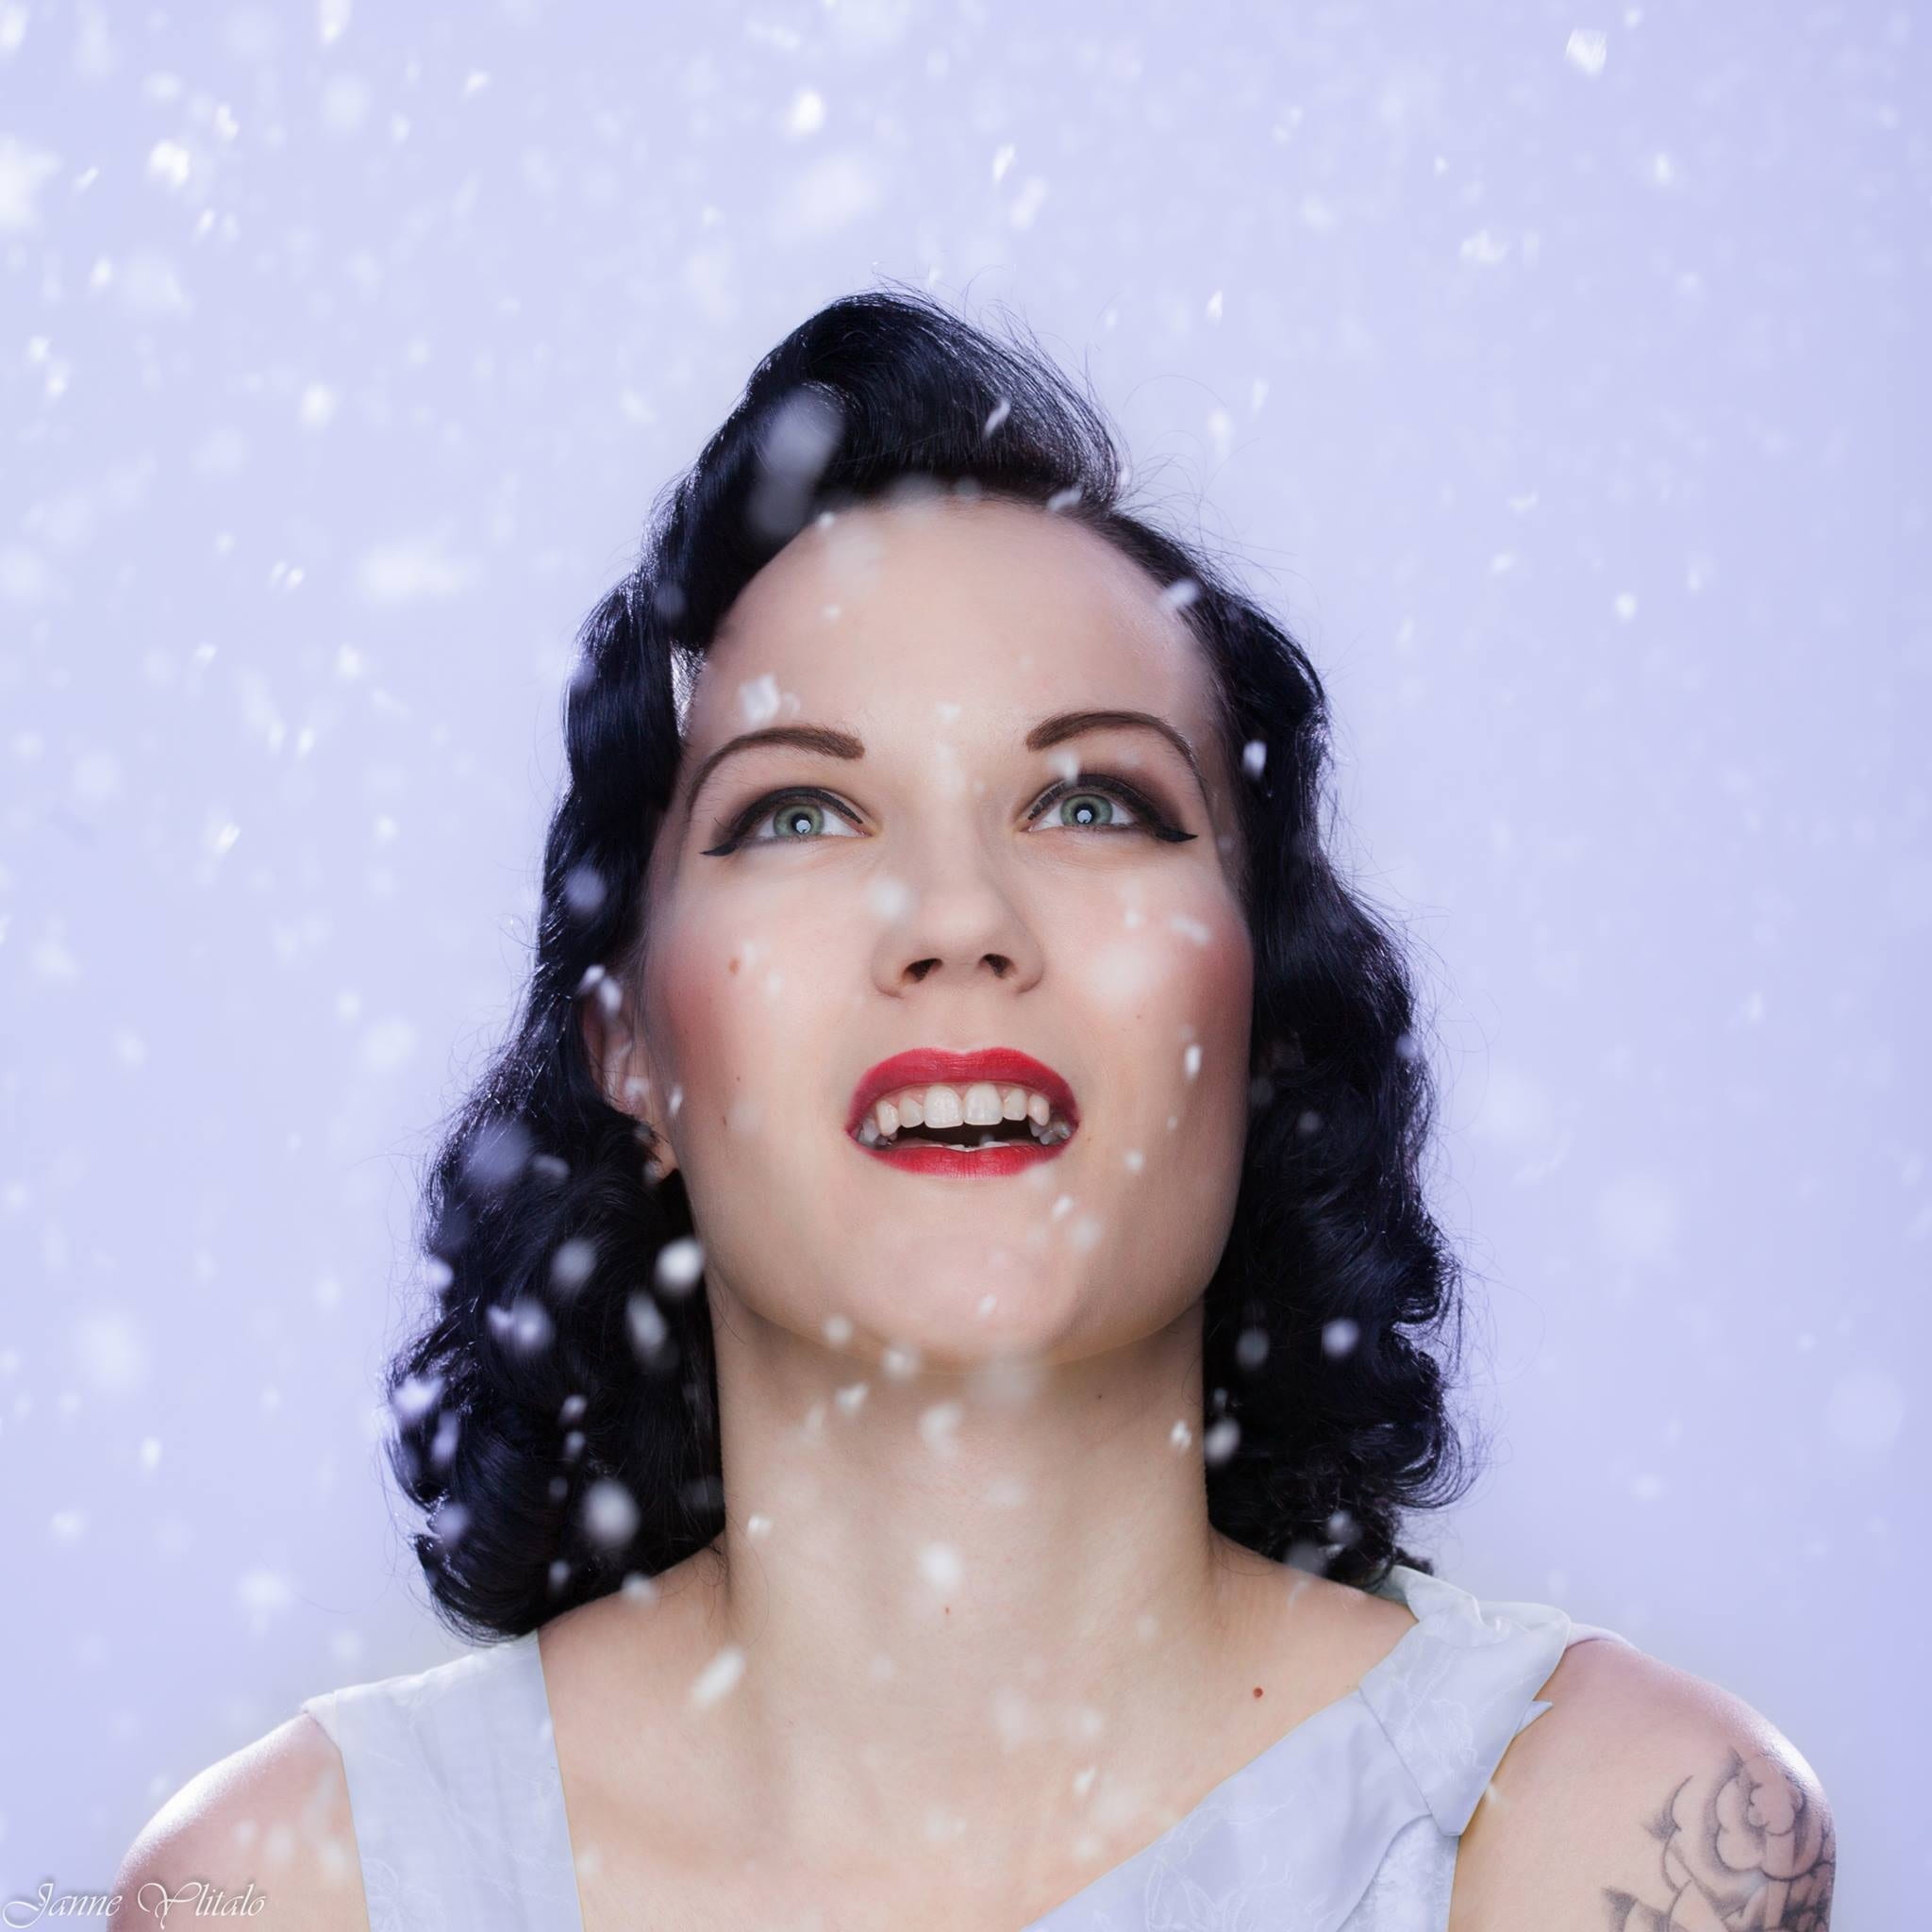 snow, white, pin-up, kisskissforbidn, portrait, young adult